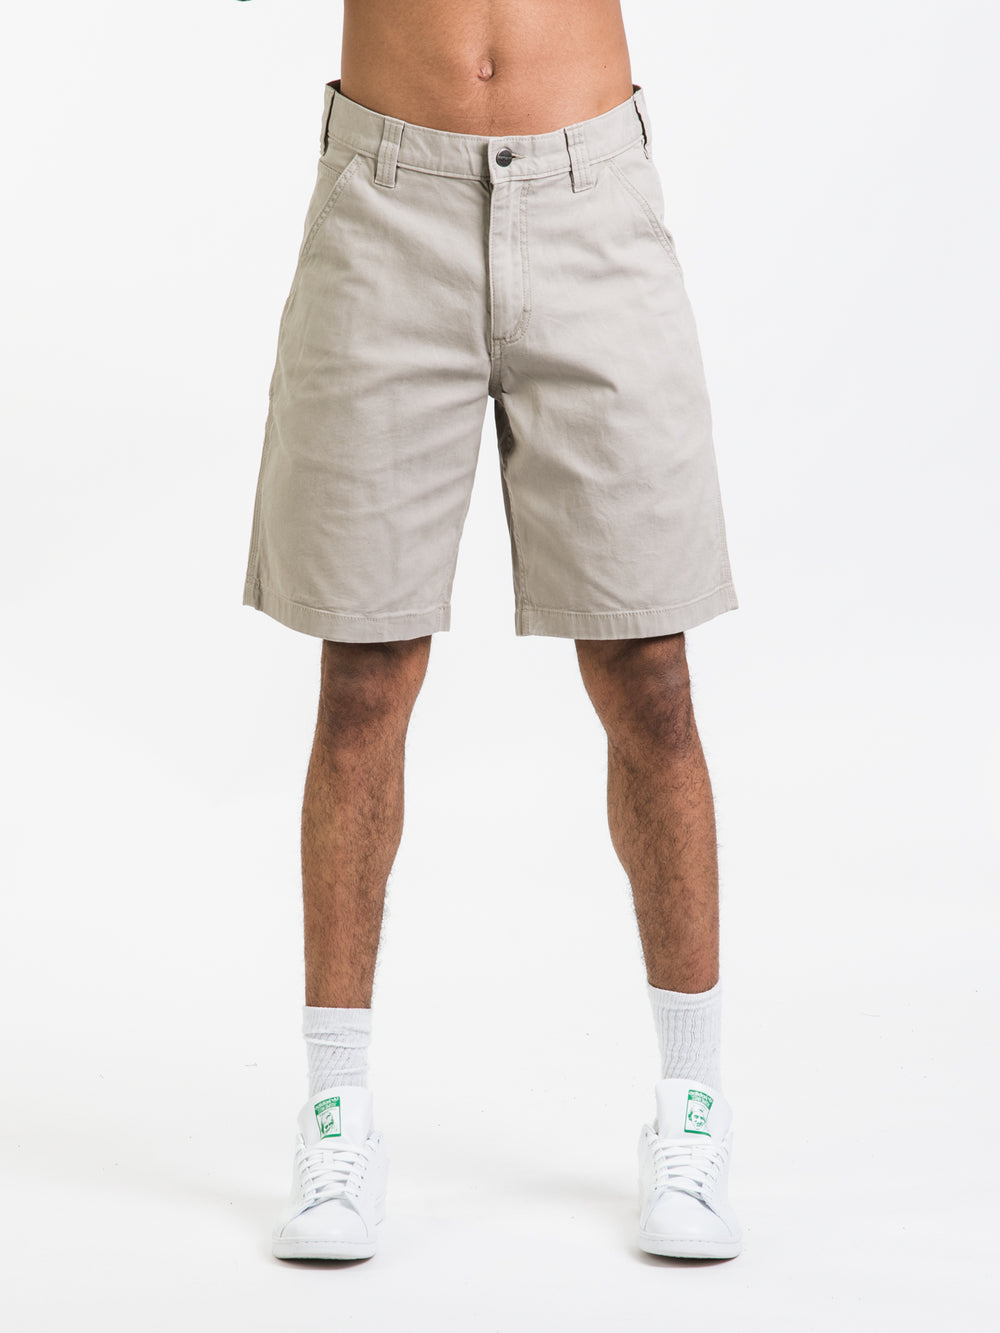 CARHARTT RUGGED FLEX RELAXED FIT SHORTS - CLEARANCE